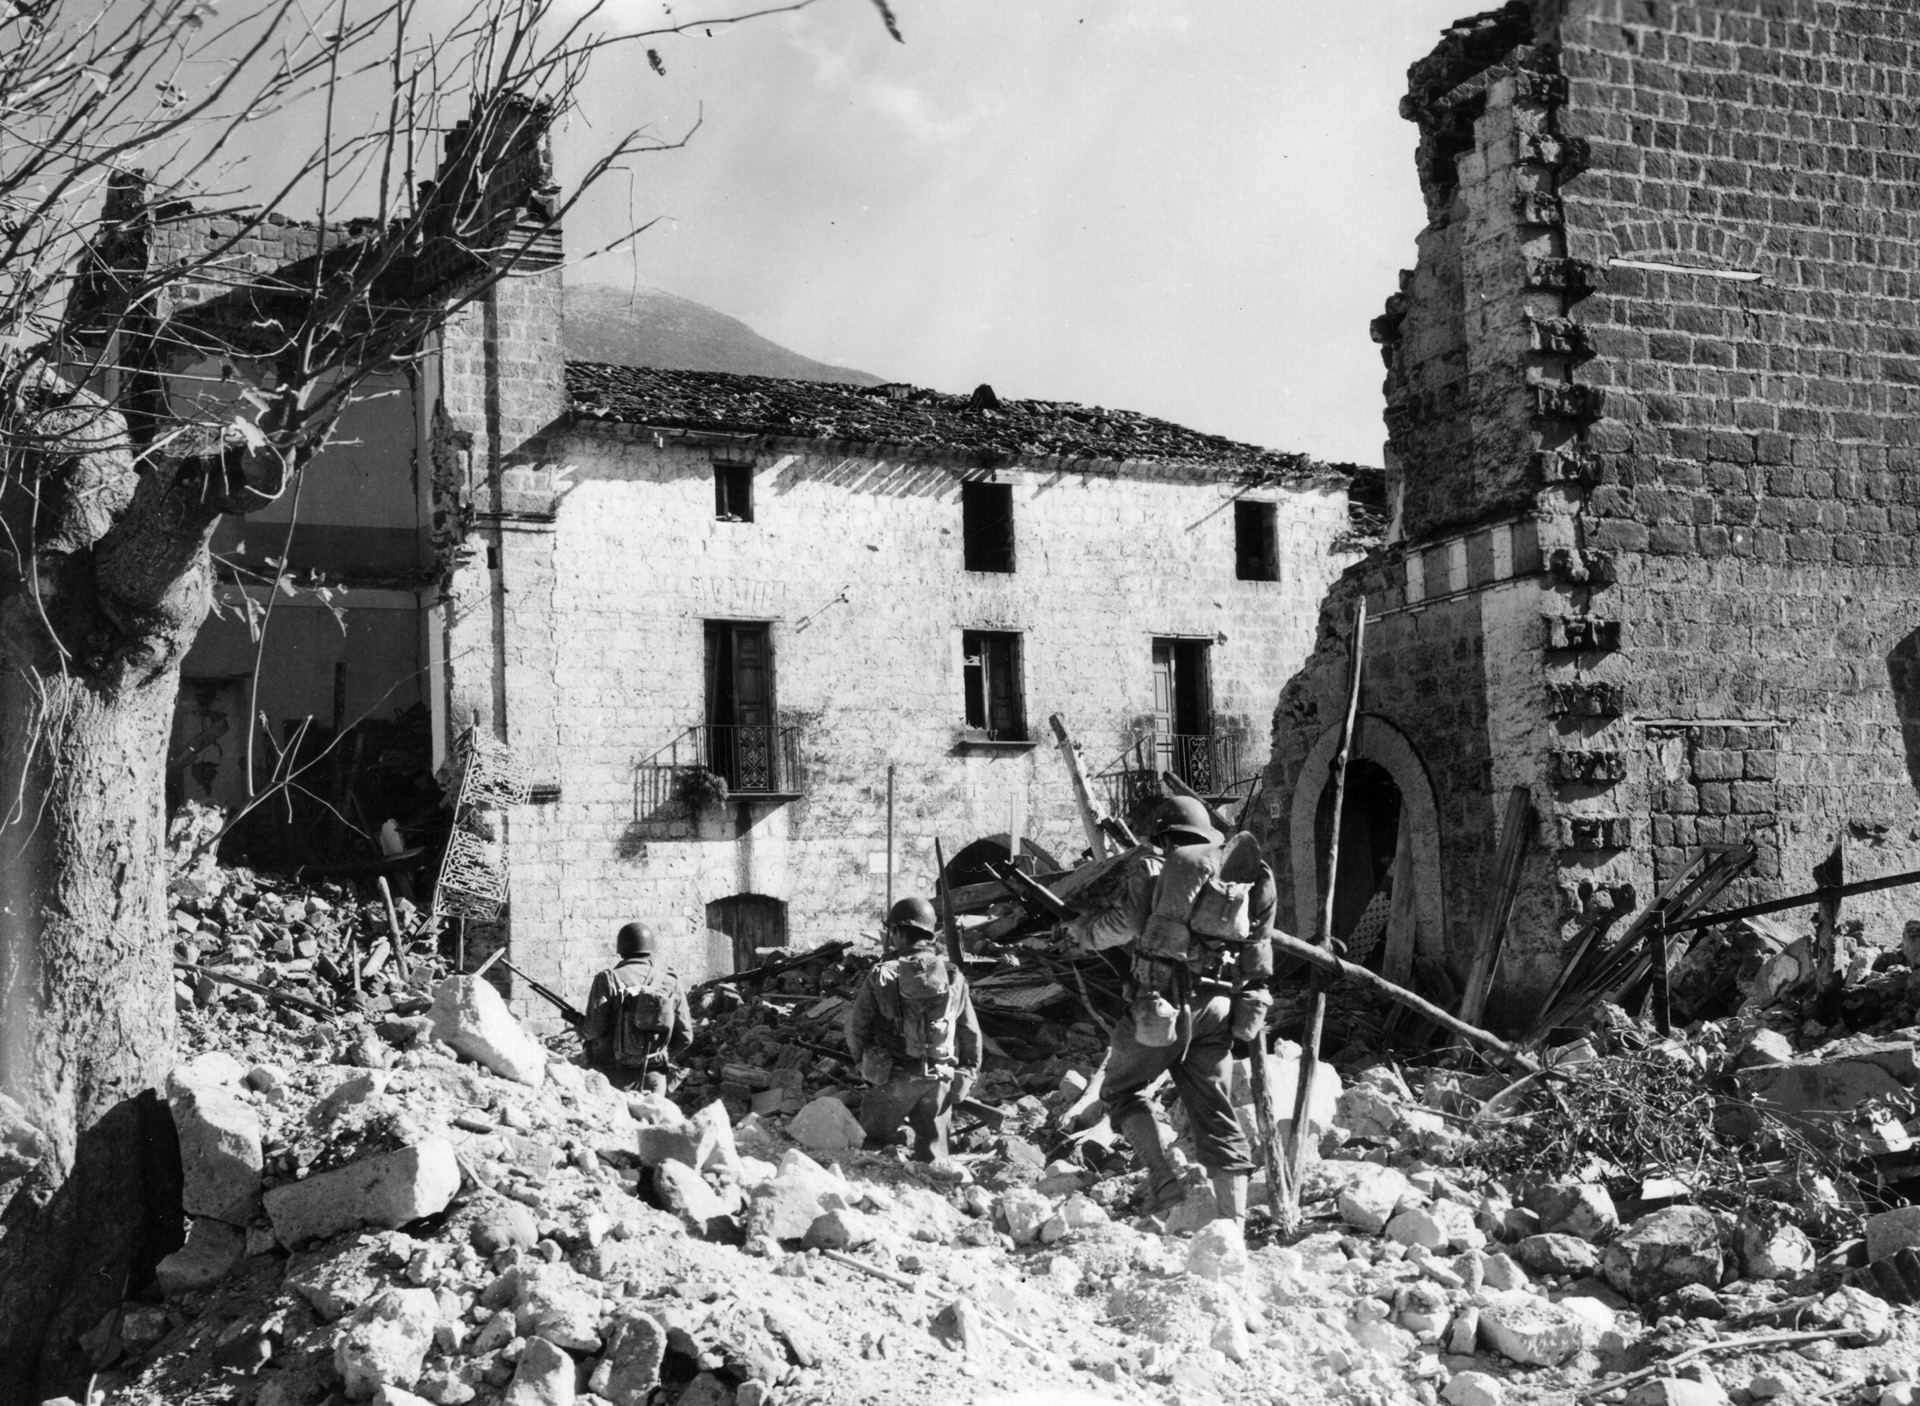 Infantrymen of the 3rd Division pick their way through the rubble of Mignano, Italy, after heavy shelling by both German and American artillery. Larimore joined the division in Naples in February 1944.